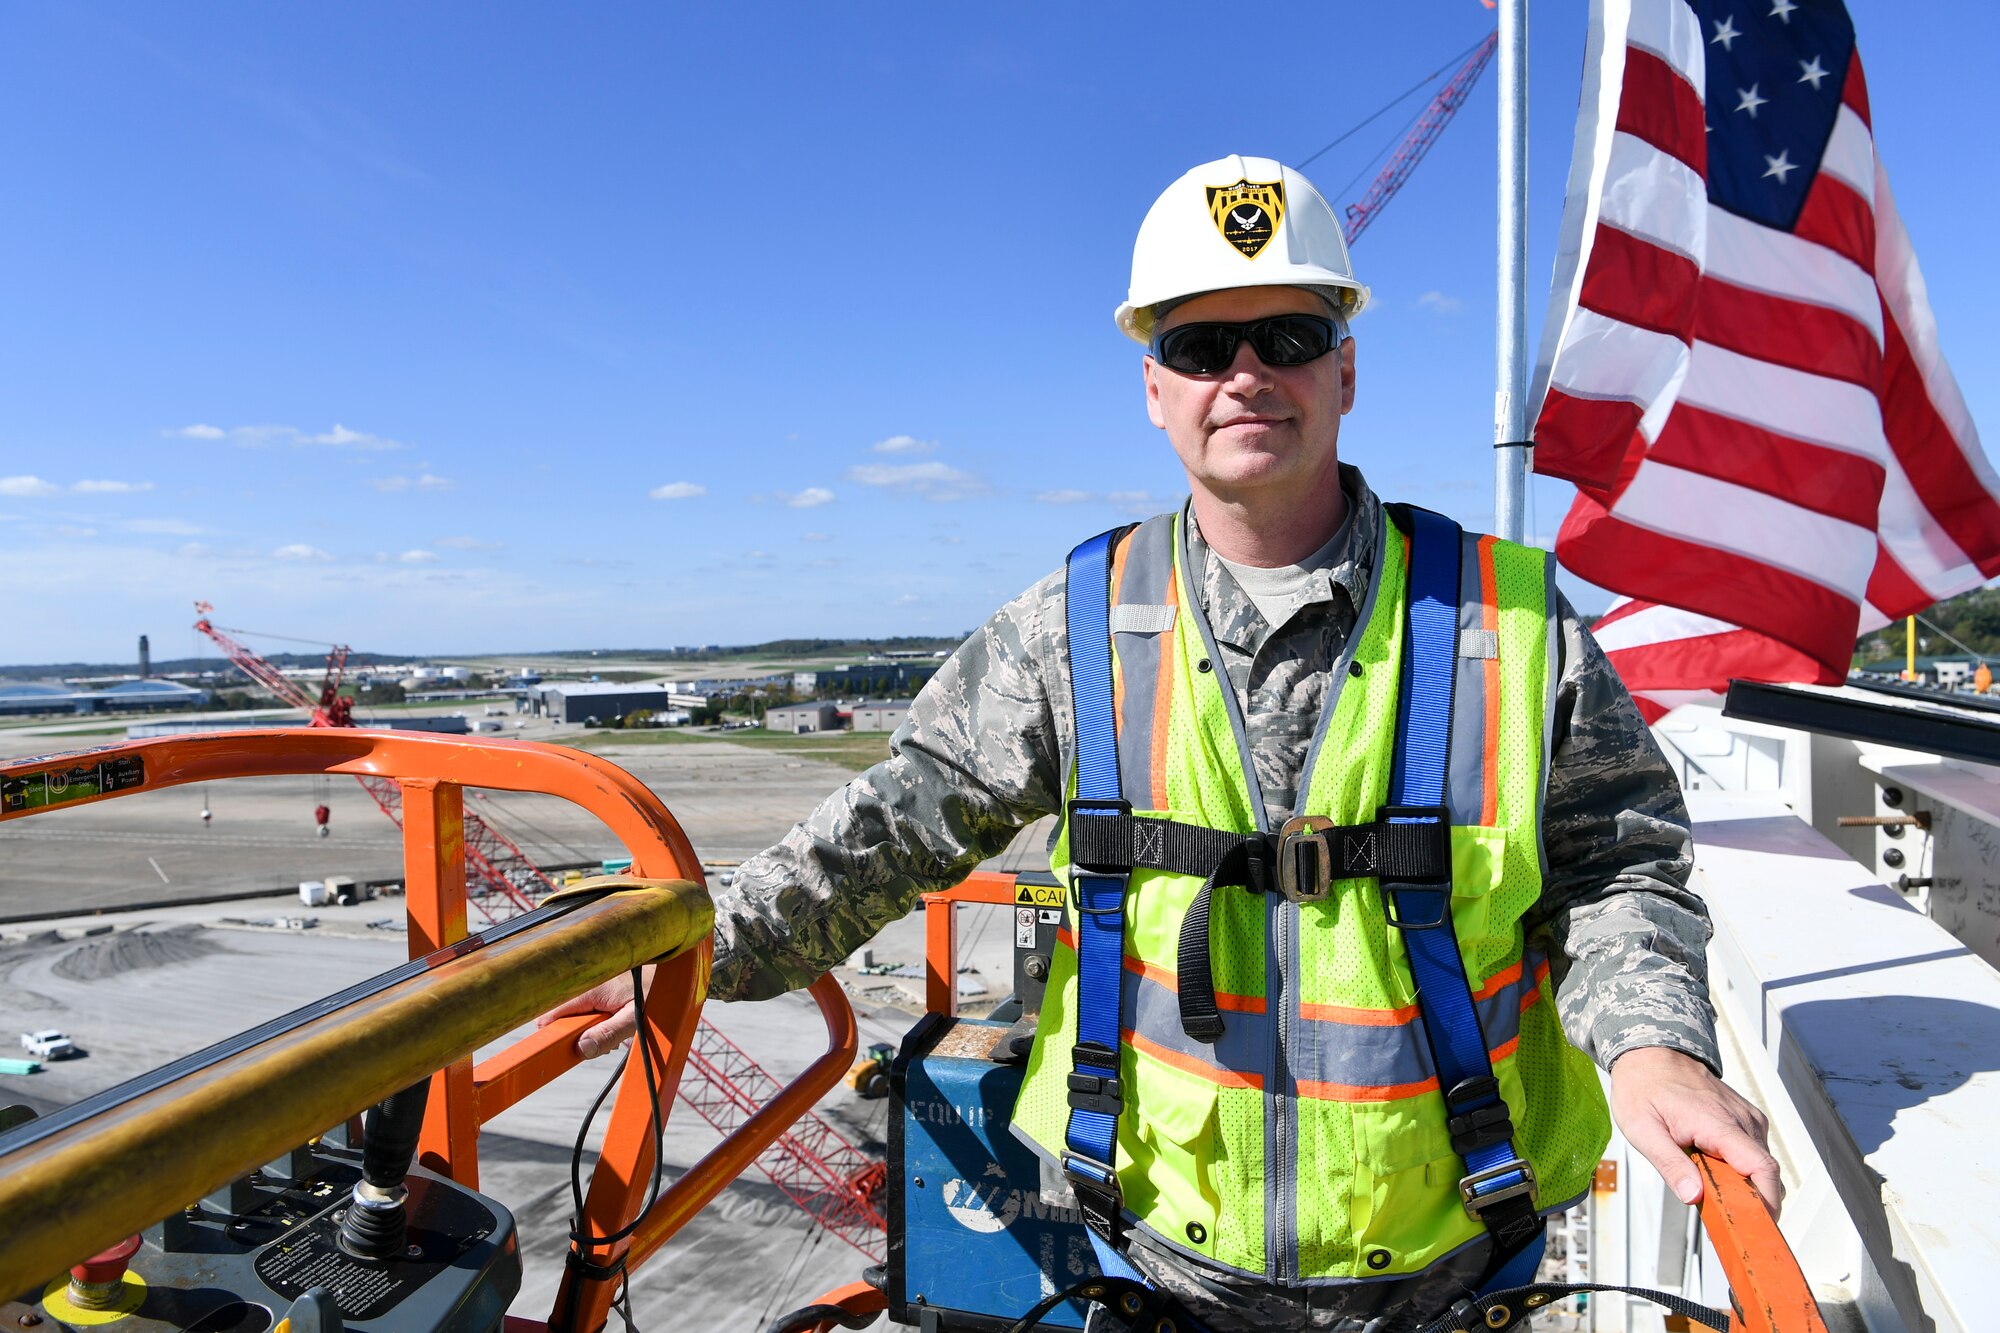 Col. Douglas Strawbridge, commander of the 911th Aiflift Wing, is lifted up to the top of the 911th Airlift Wing's new C-17 hangar at the Pittsburgh International Airport Air Reserve Station, Pennsylvania, Oct. 10, 2017. Strawbridge was signing the final roof beam used for the project, a hangar which will house two C-17 aircraft. (U.S. Air Force photo by Senior Airman Beth Kobily)